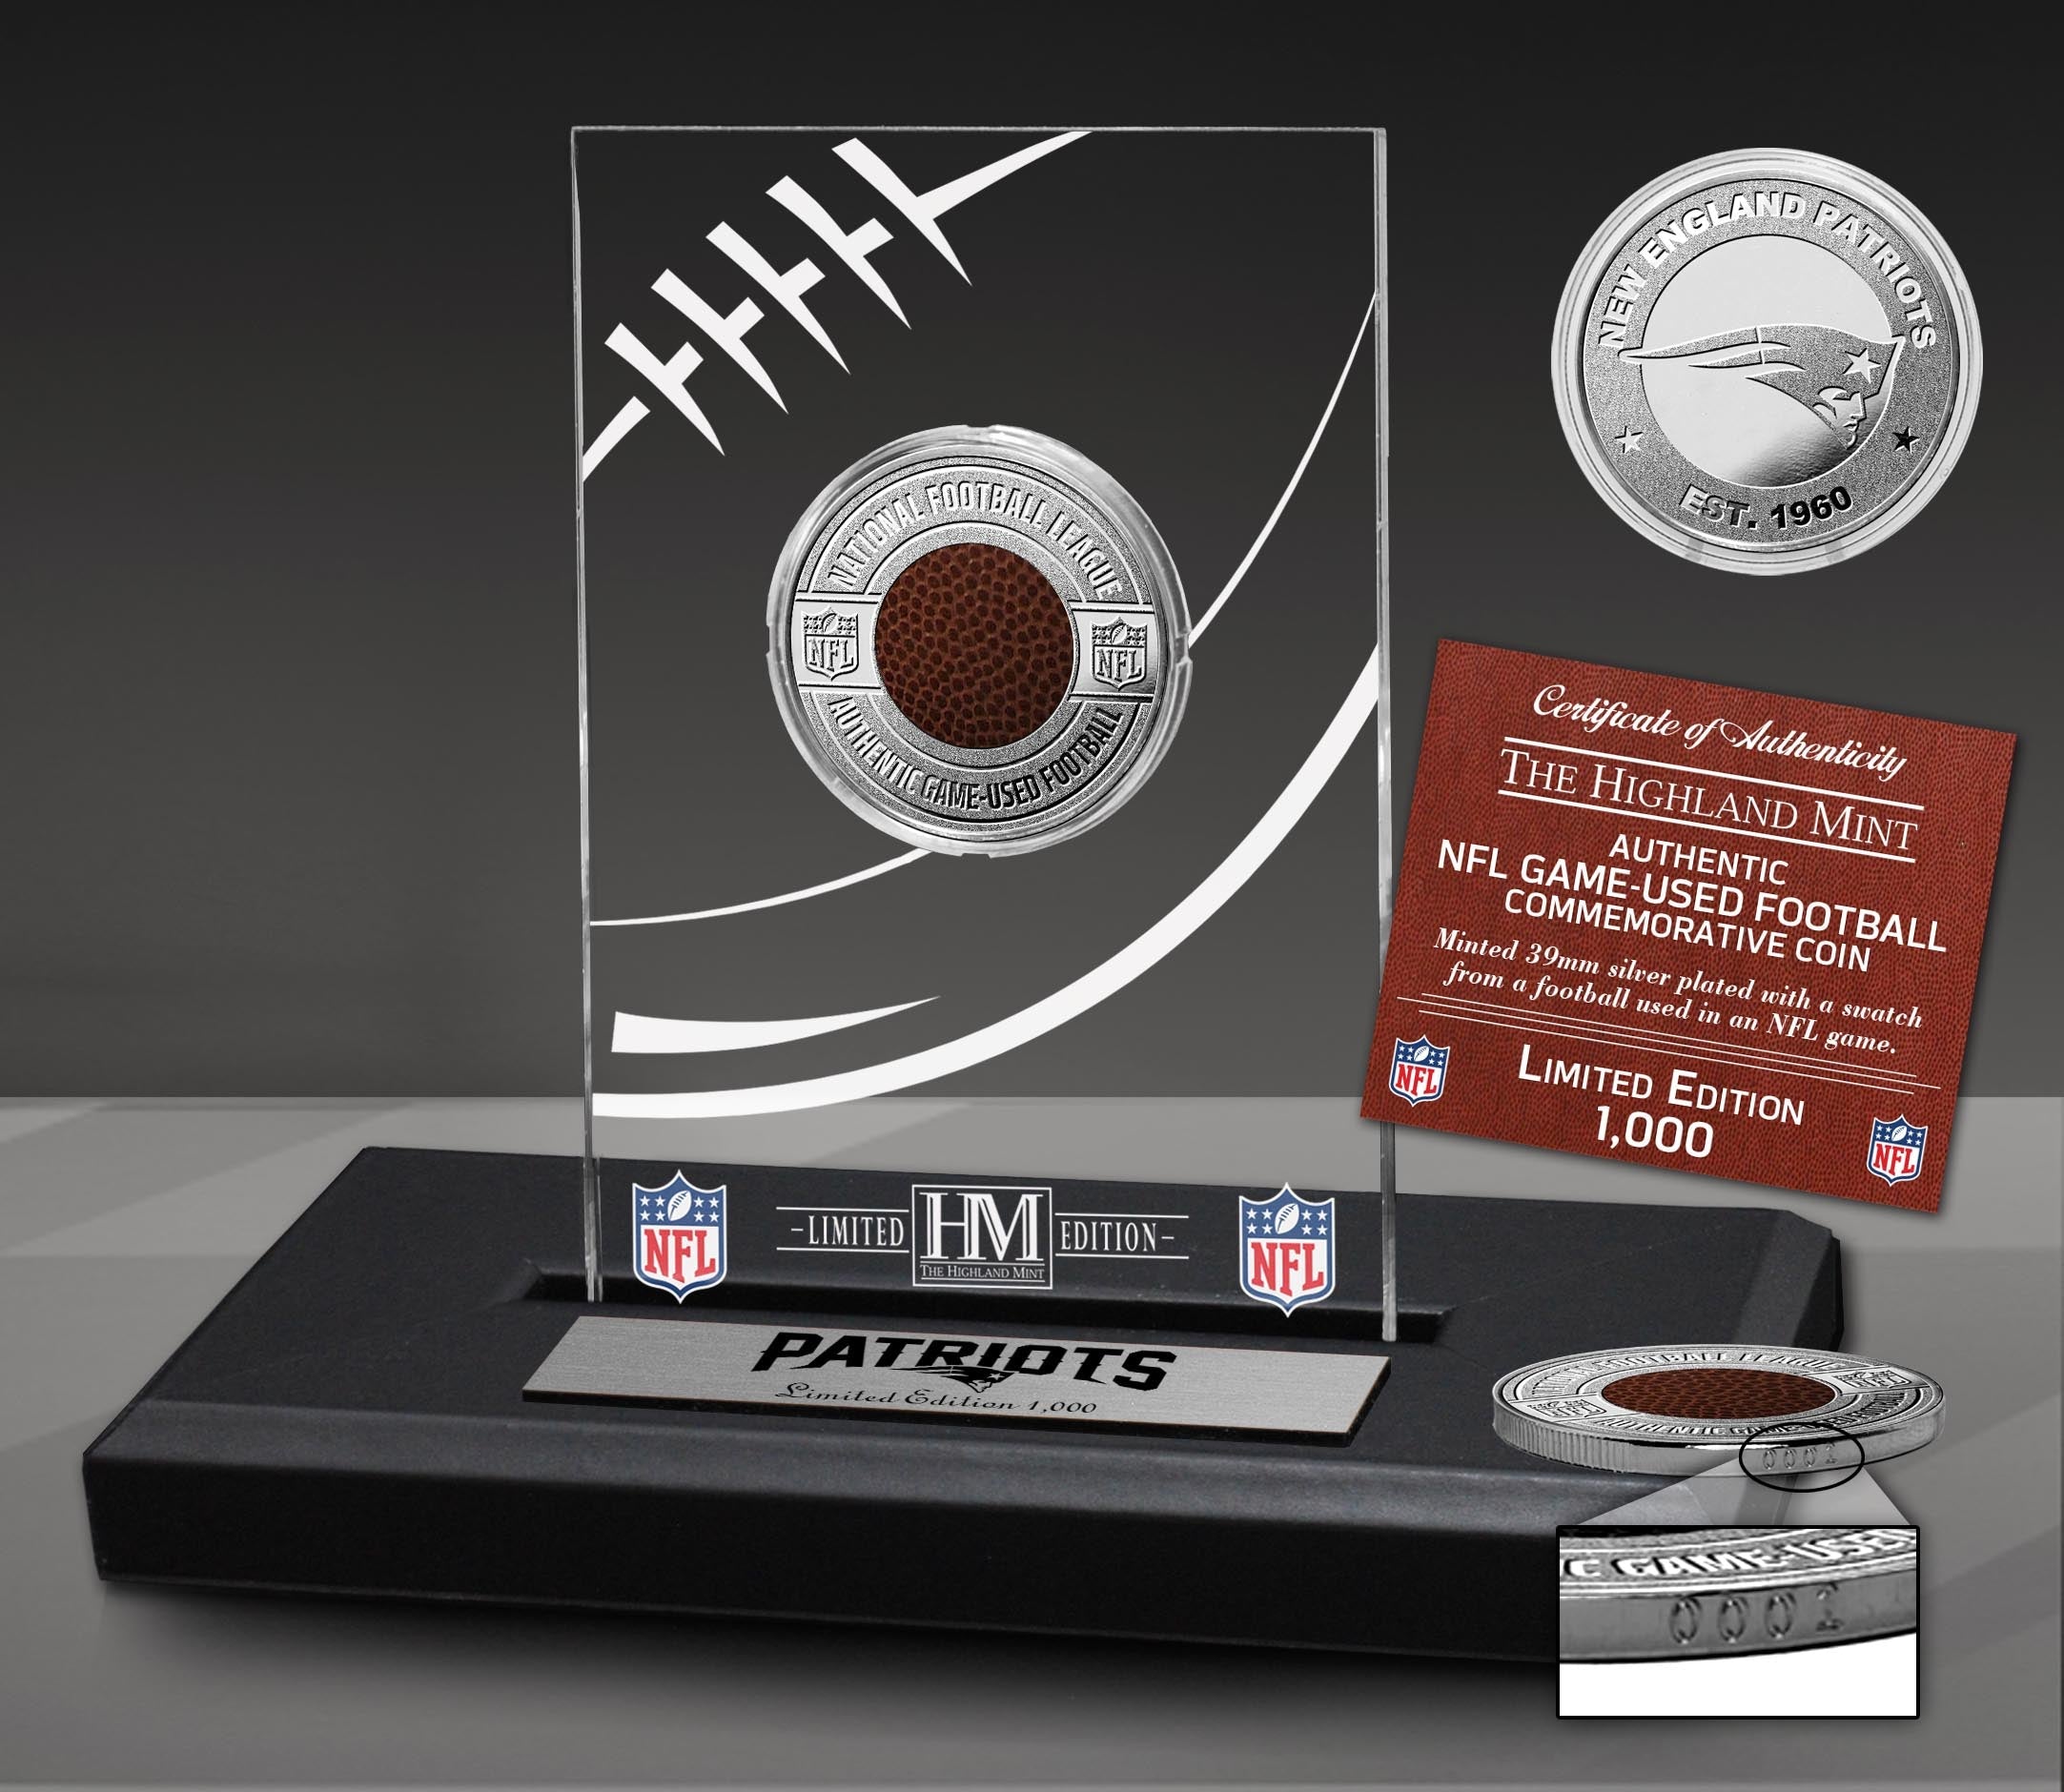 New England Patriots Game Used NFL Football Silver Plated Coin in Commemorative Display